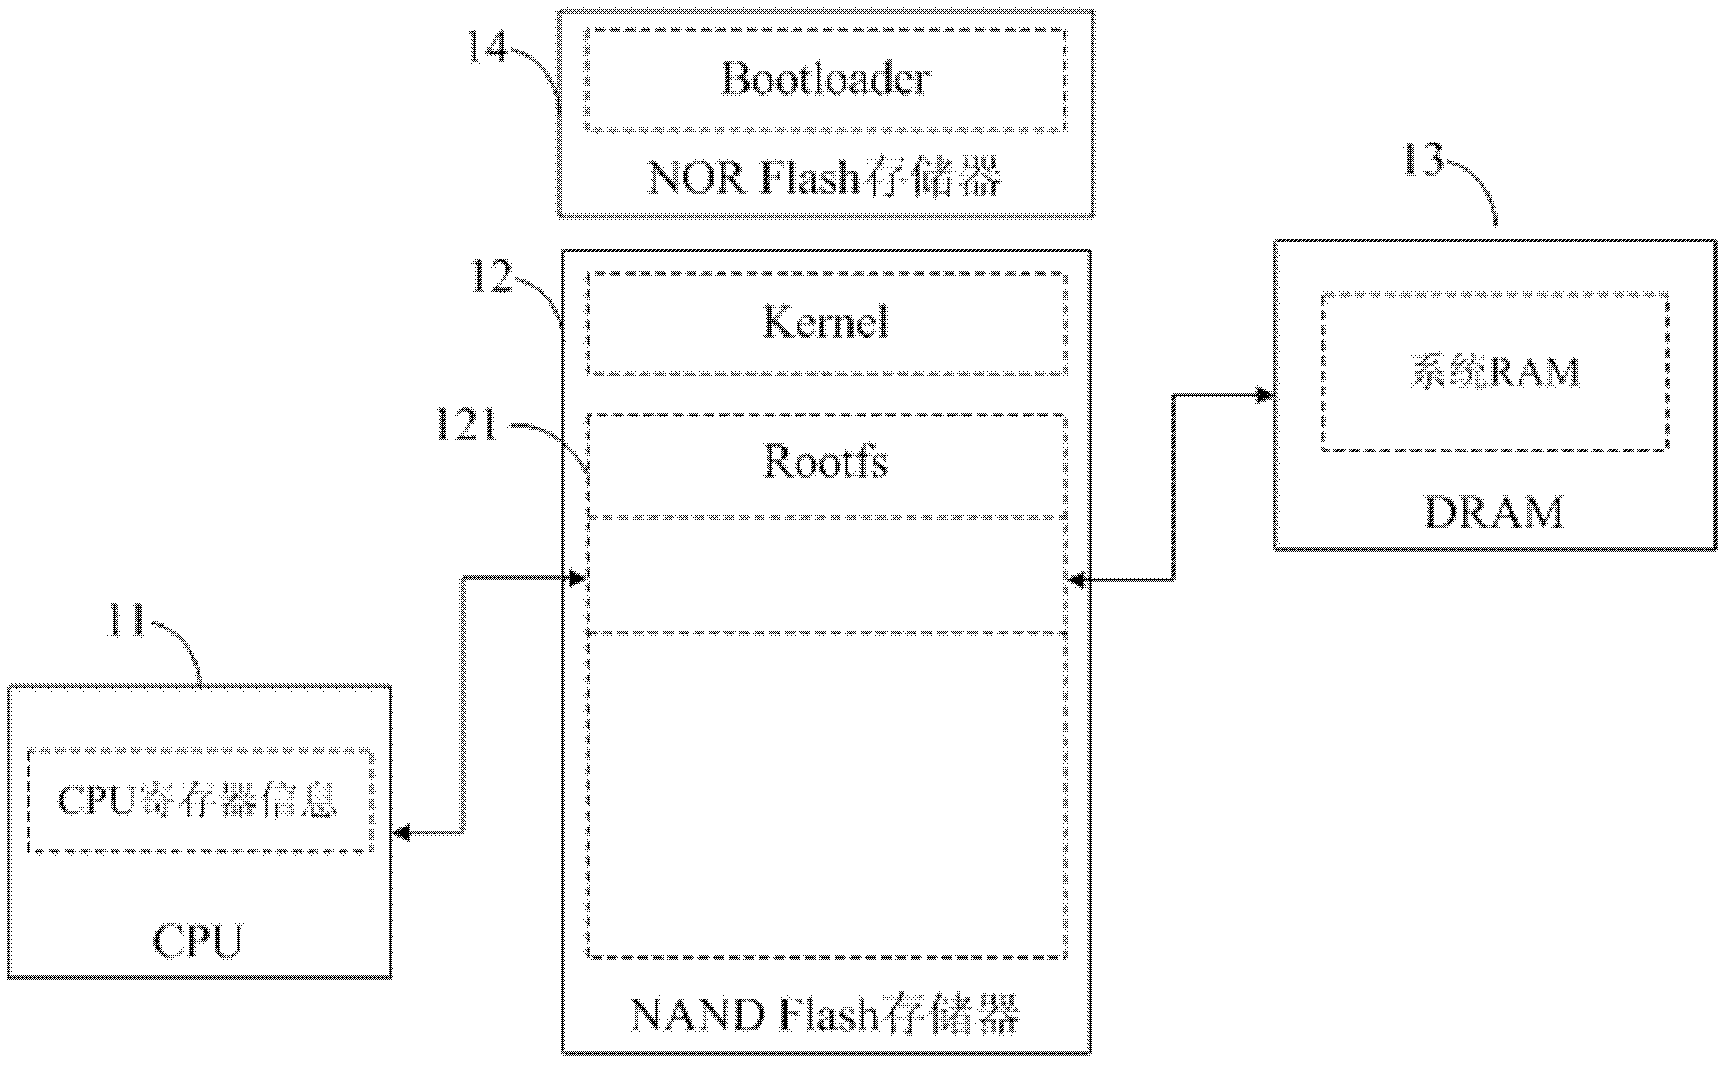 Dormancy and wake-up system for embedded device based on non-volatile random access memory